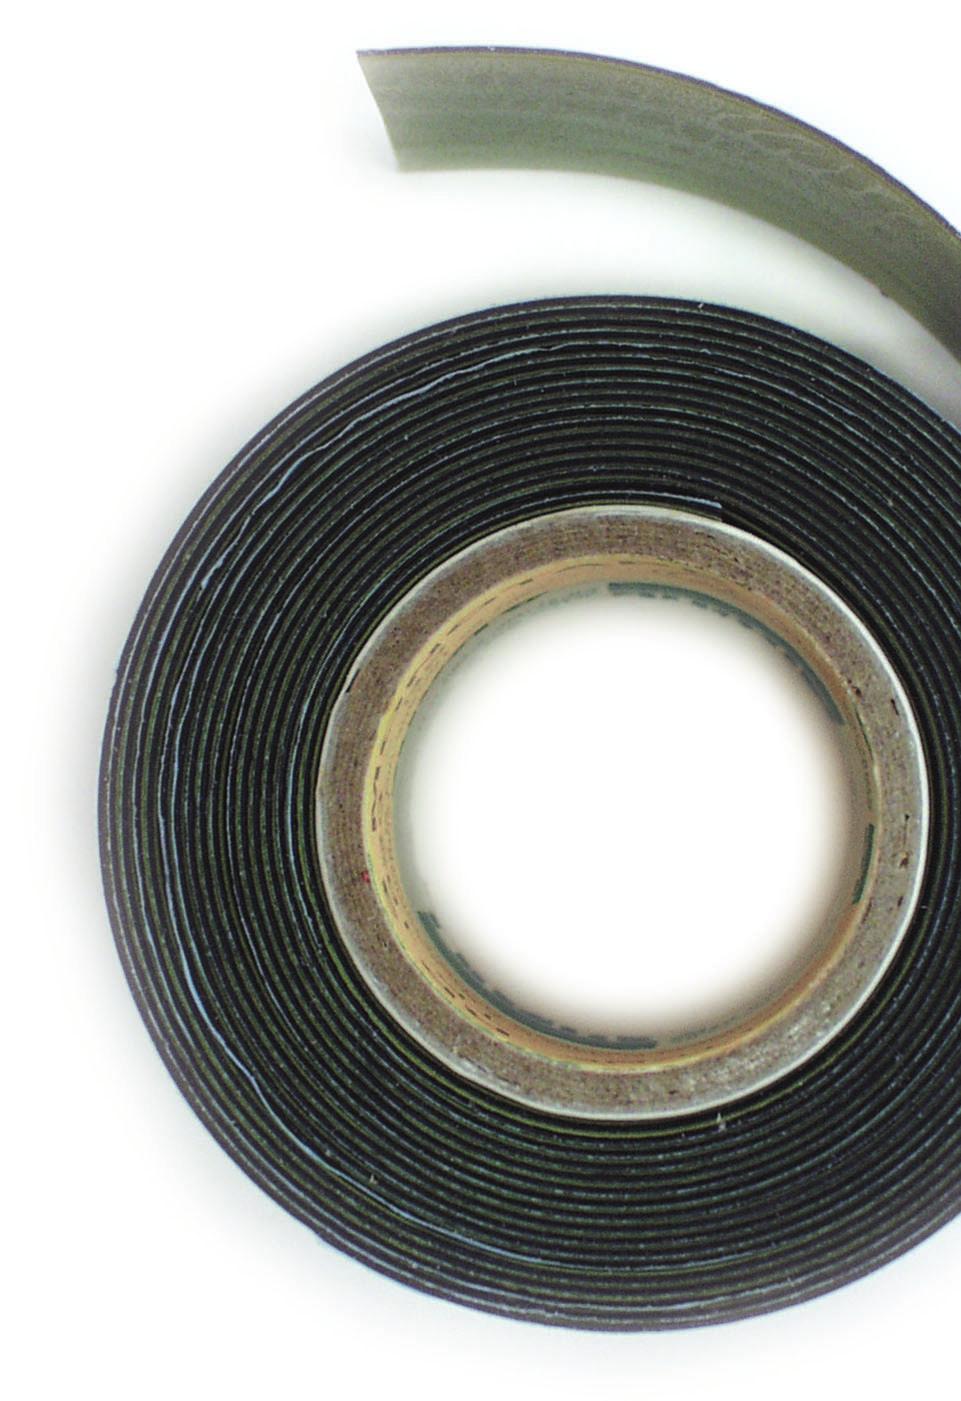 The Systems PSI anti-corrosion tapes have been specially developed for high-quality, onsite